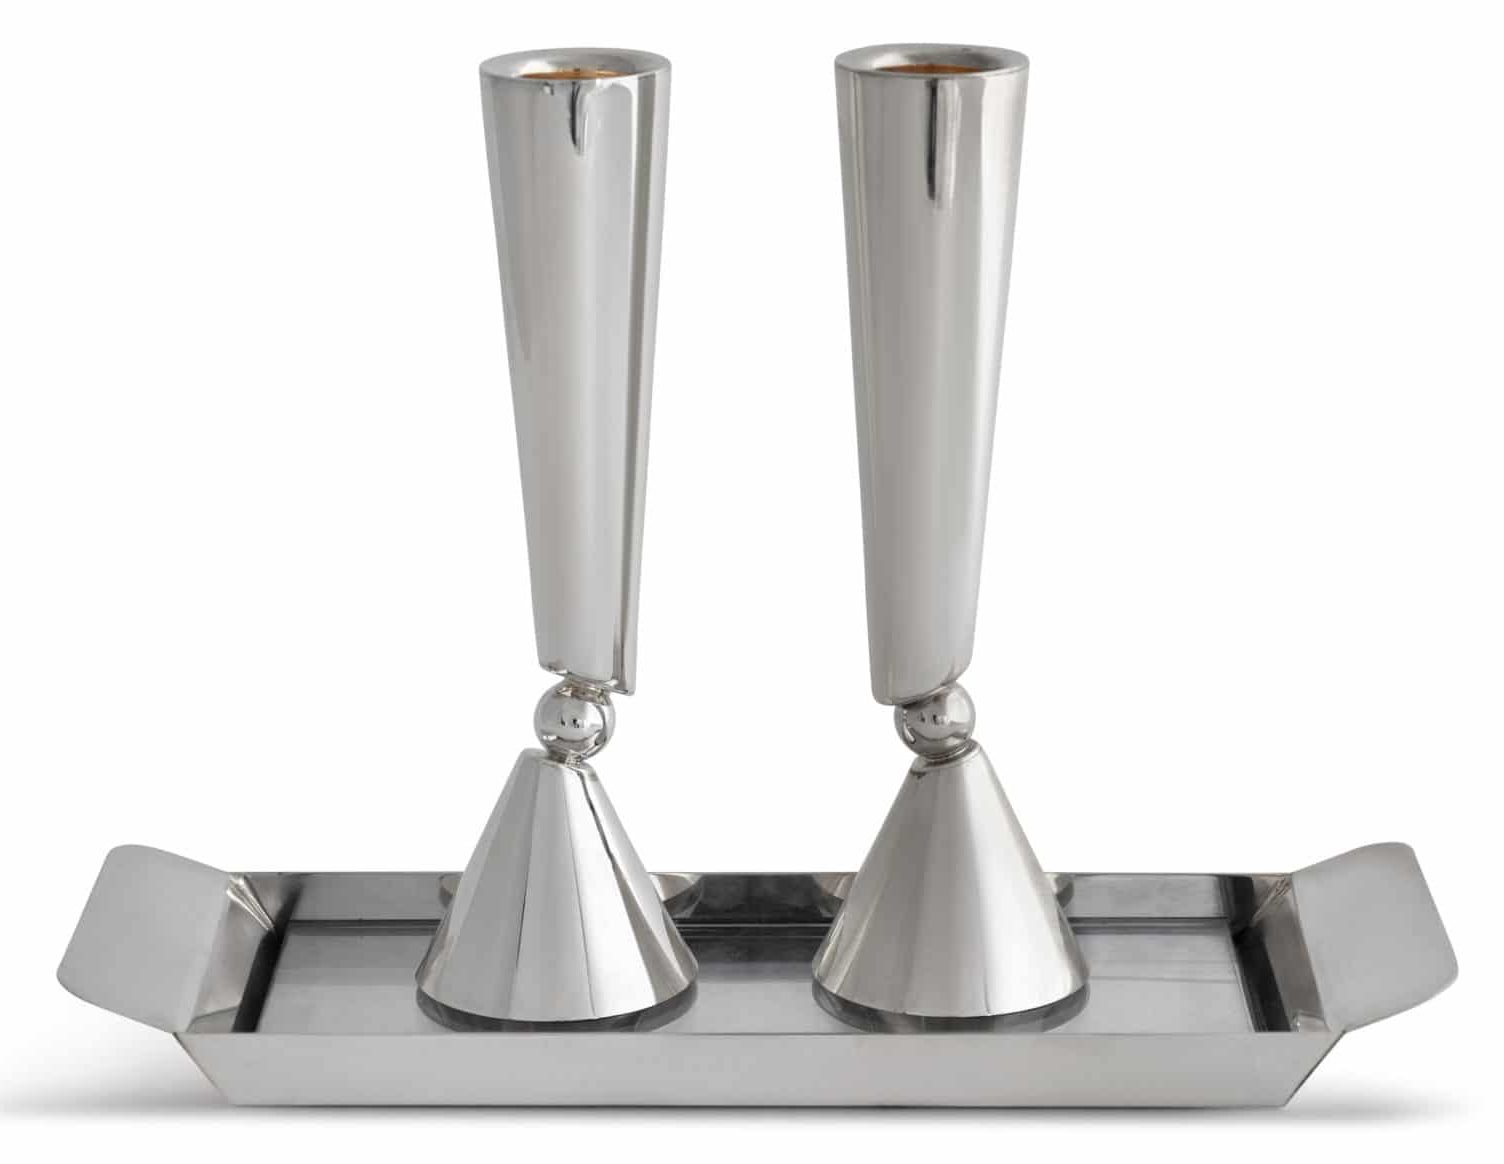 Personalized Classic Long 925 Sterling Silver Candlesticks